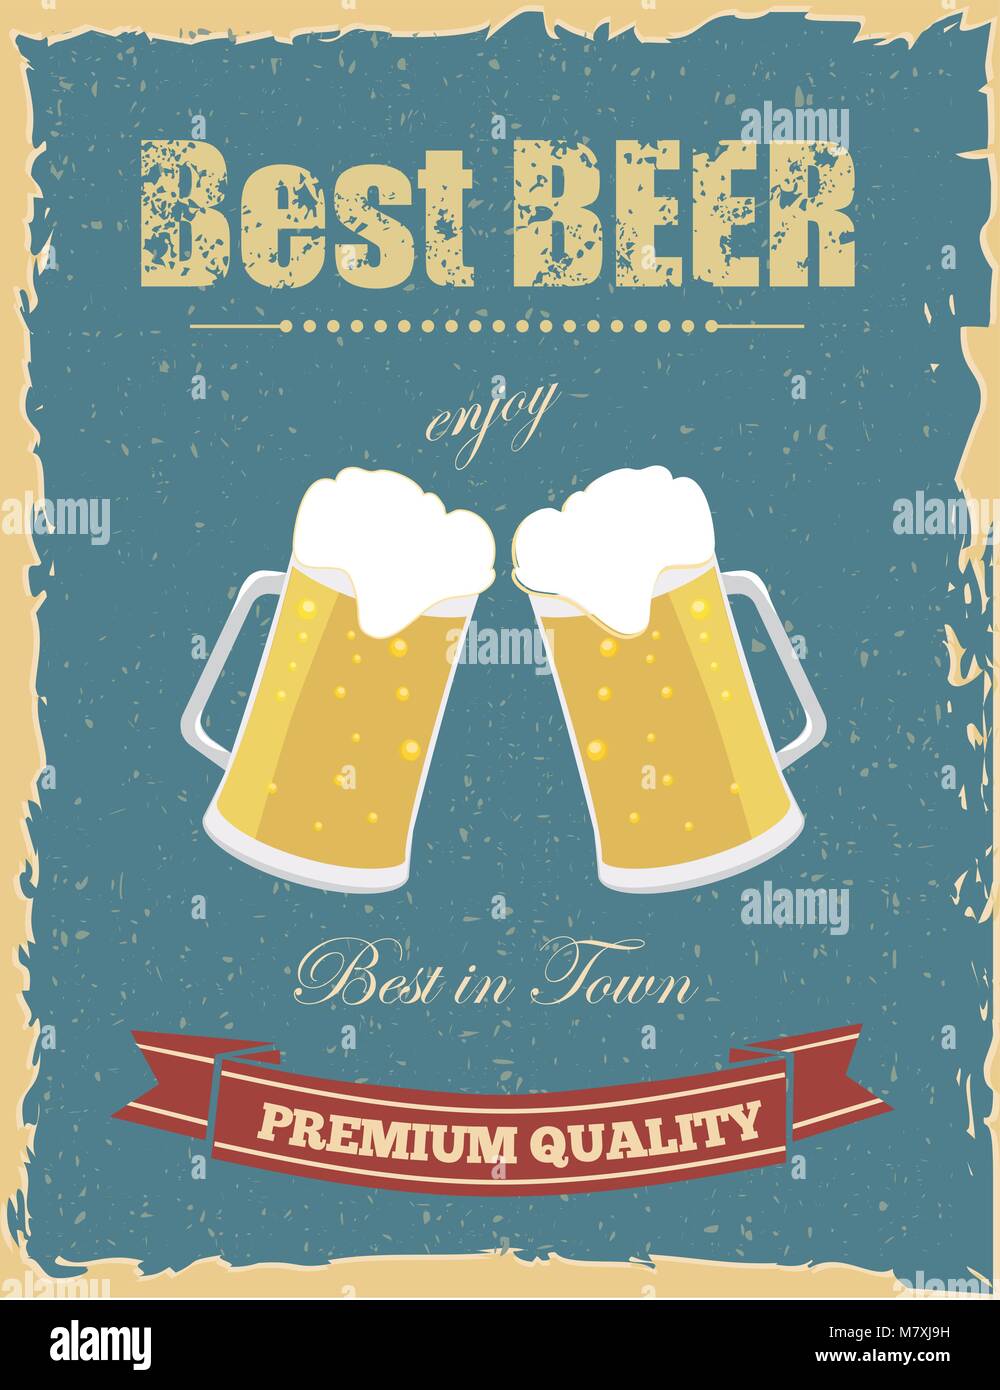 Vintage beer poster with grunge effects. Stock Vector